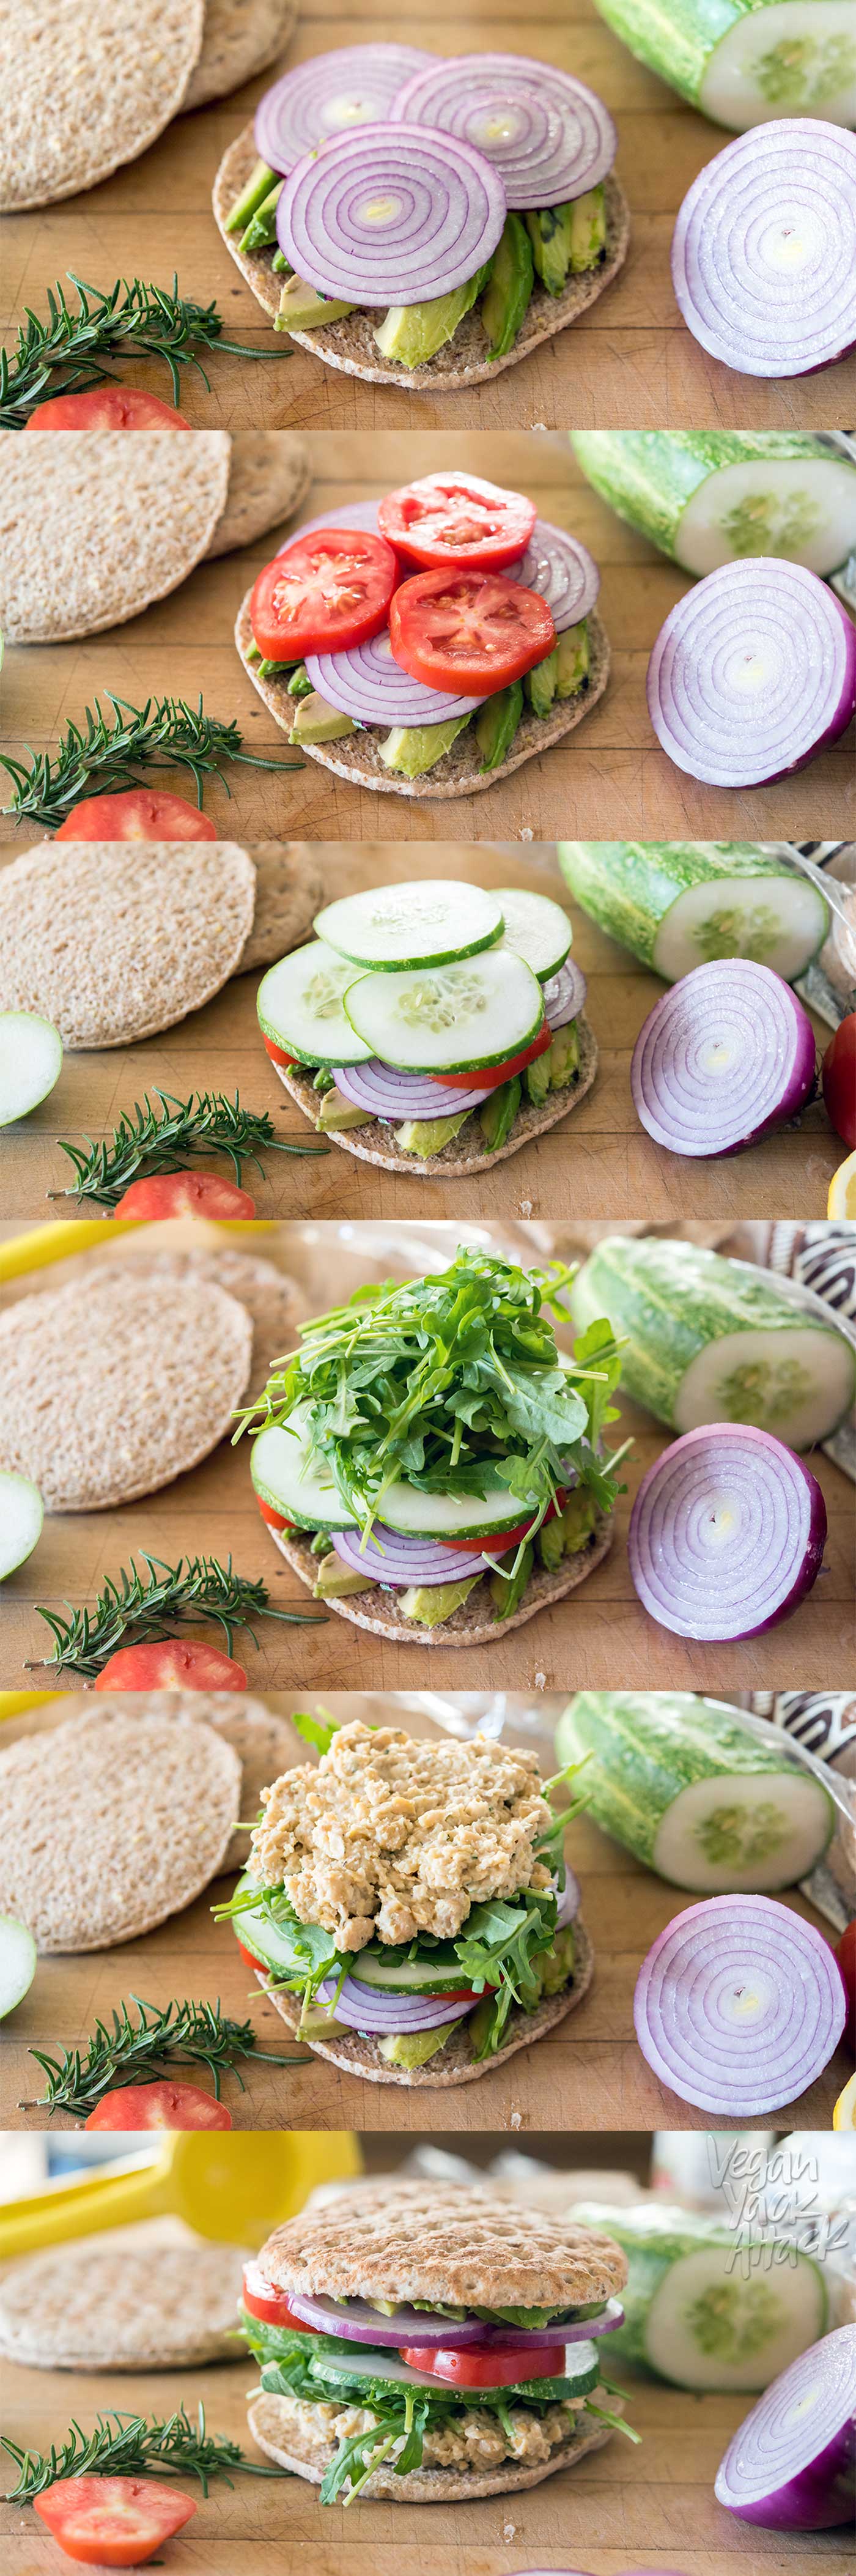 Rosemary Chickpea Salad Sandwich: Here’s a back-to-school-ready lunch idea that’s easy and delicious! #vegan #soyfree #nutfree